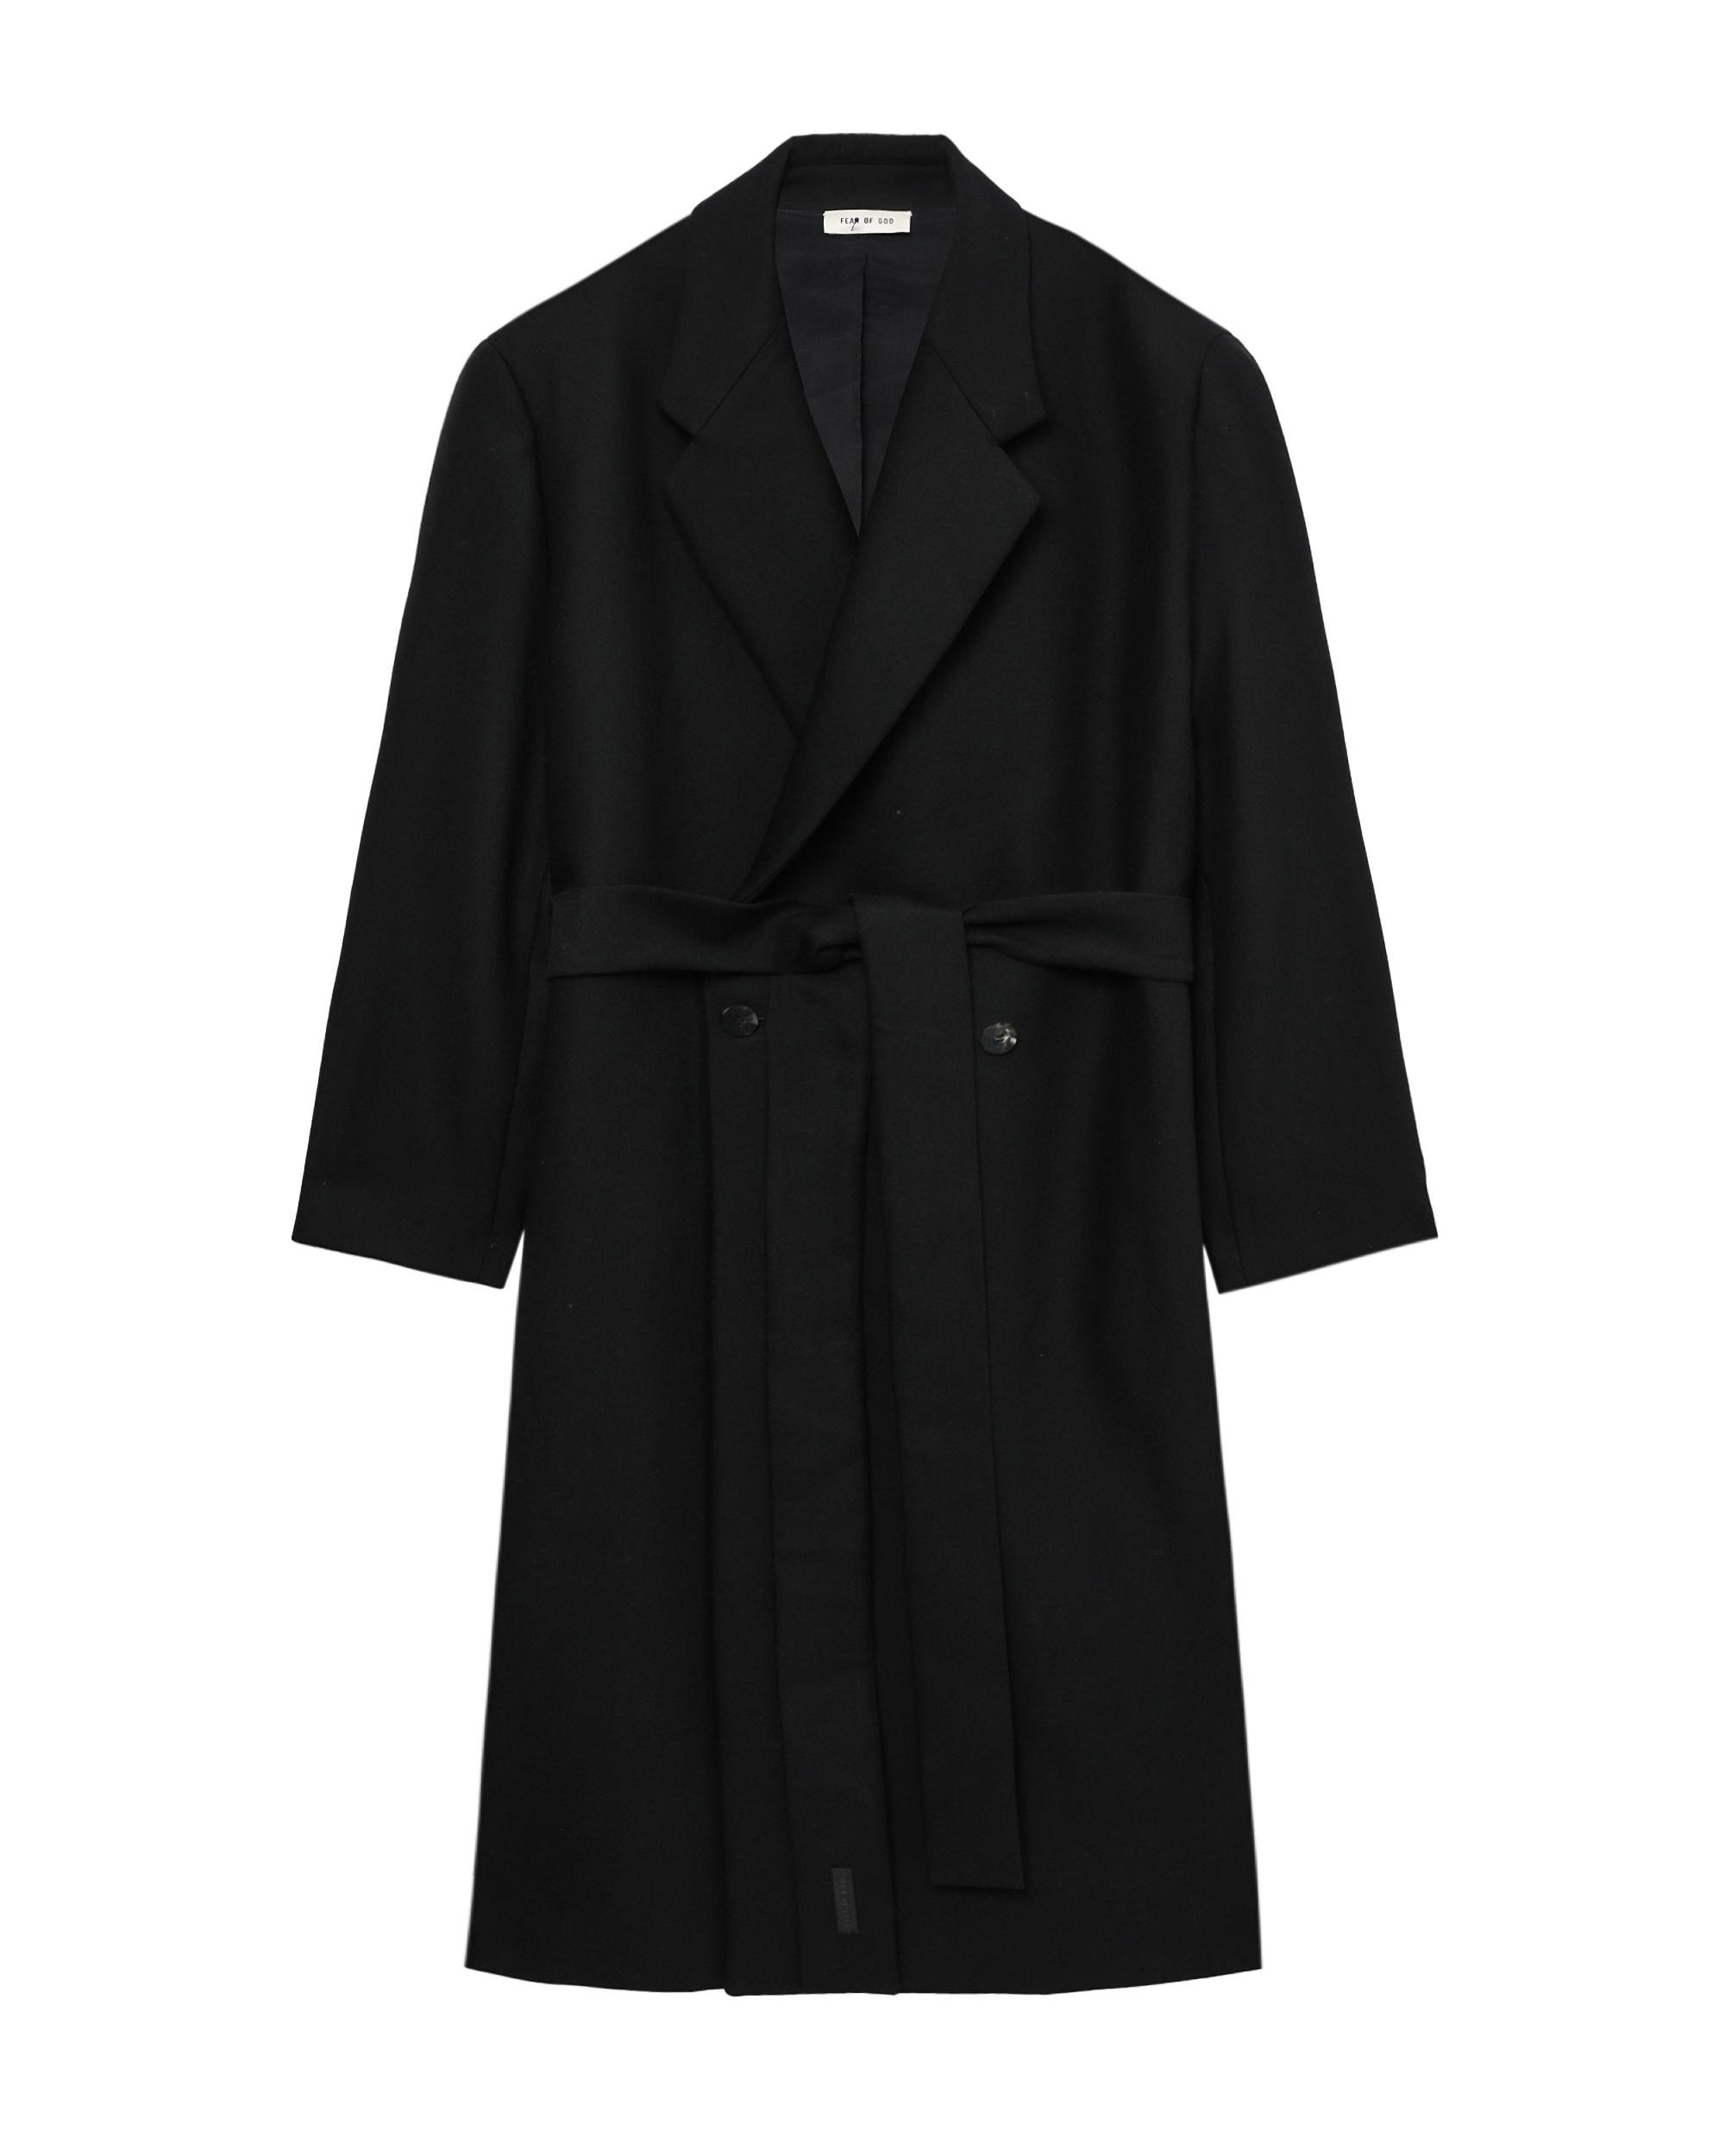 Double-breasted overcoat by FEAR OF GOD